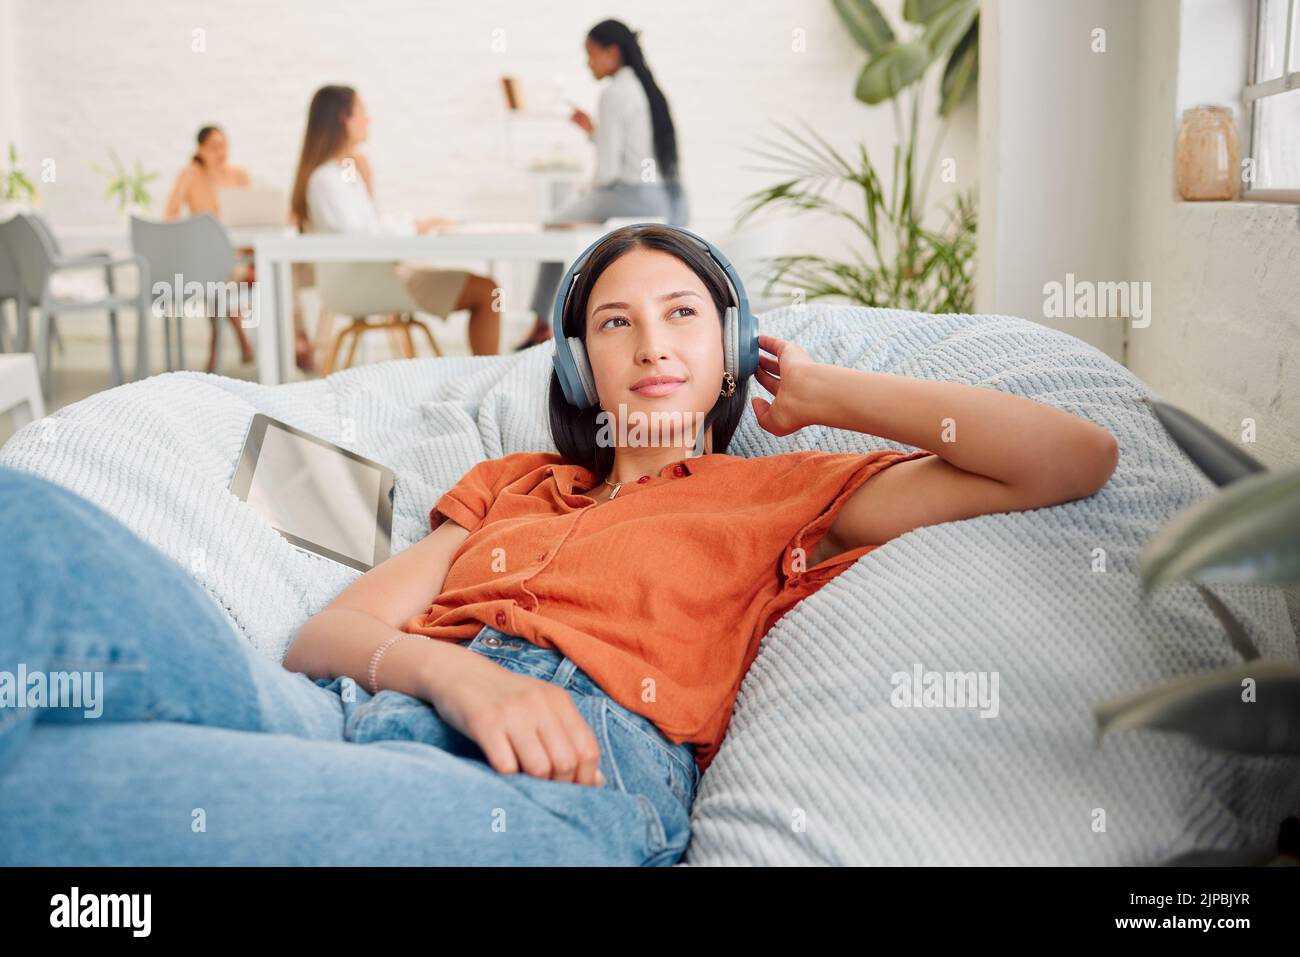 Creative wearing headphones, listening to music and relaxing with zen songs or podcast to help with thinking, planning and inspiration. Motivated Stock Photo